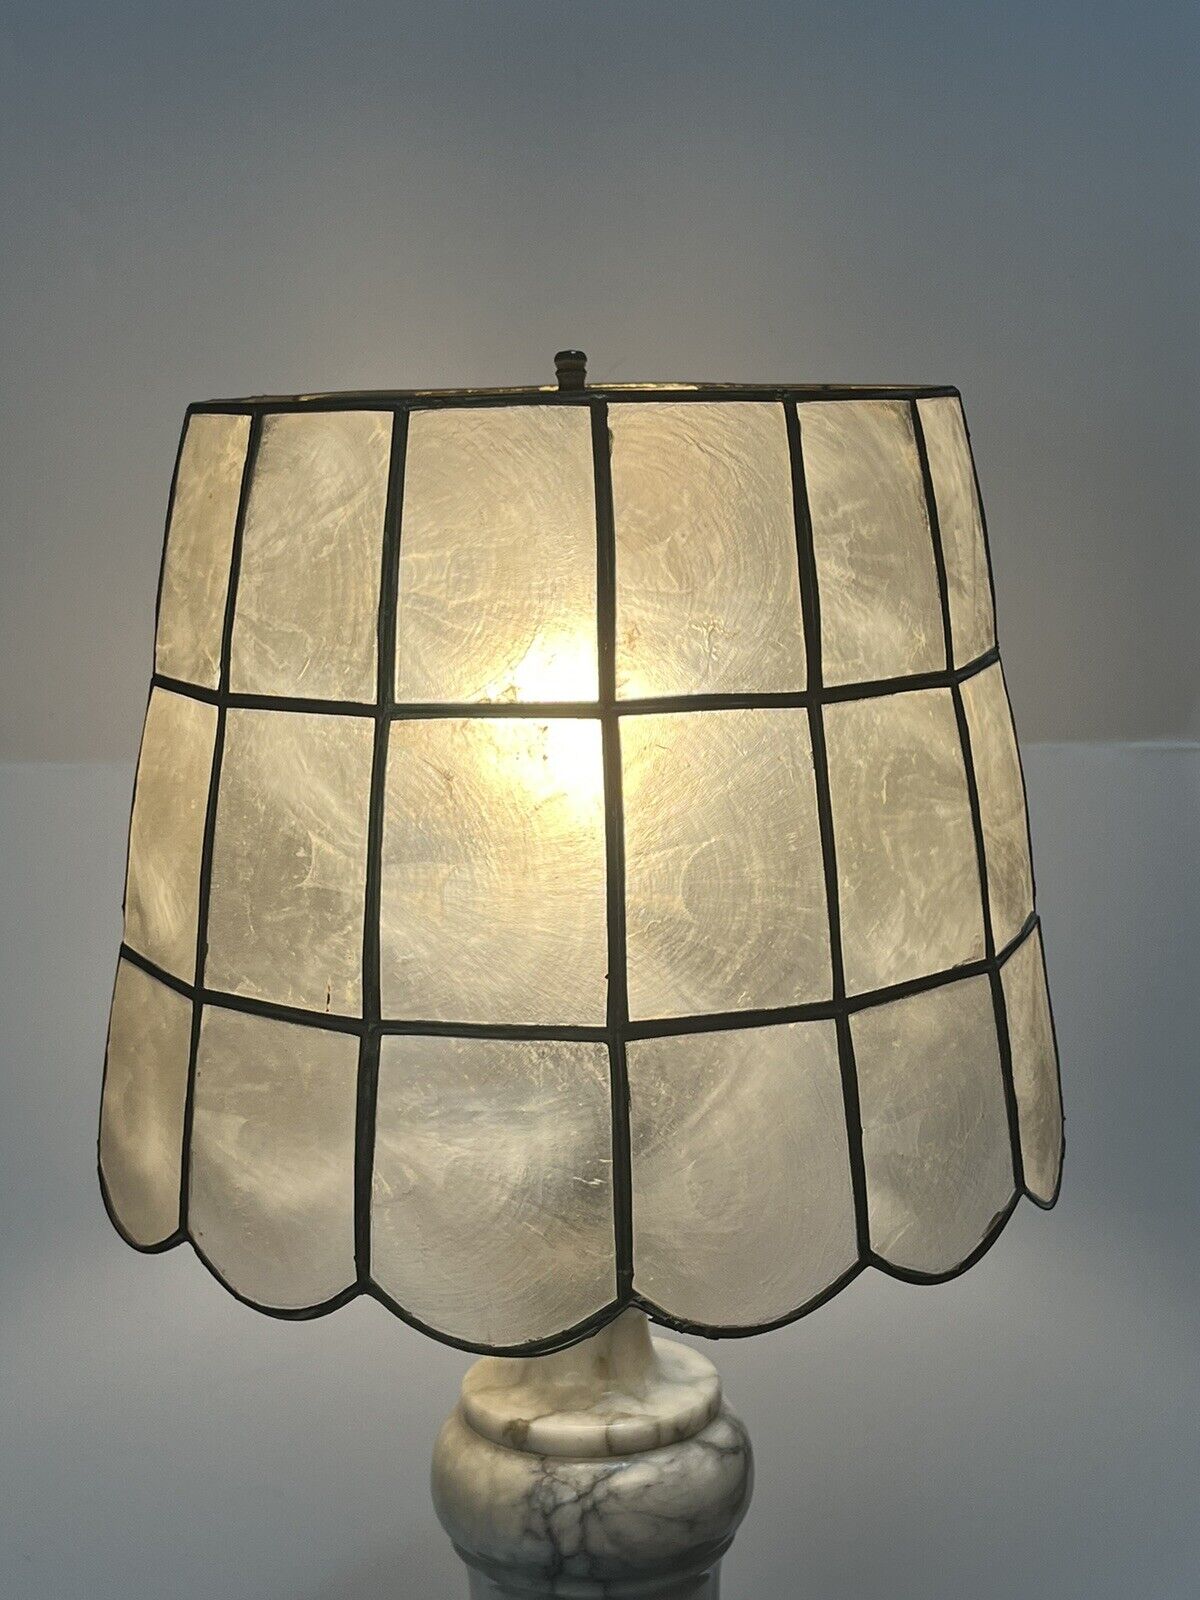 Capiz Shell Lamp Shade Oyster Tapered Mid Century Vintage 10.5” x 8.5”